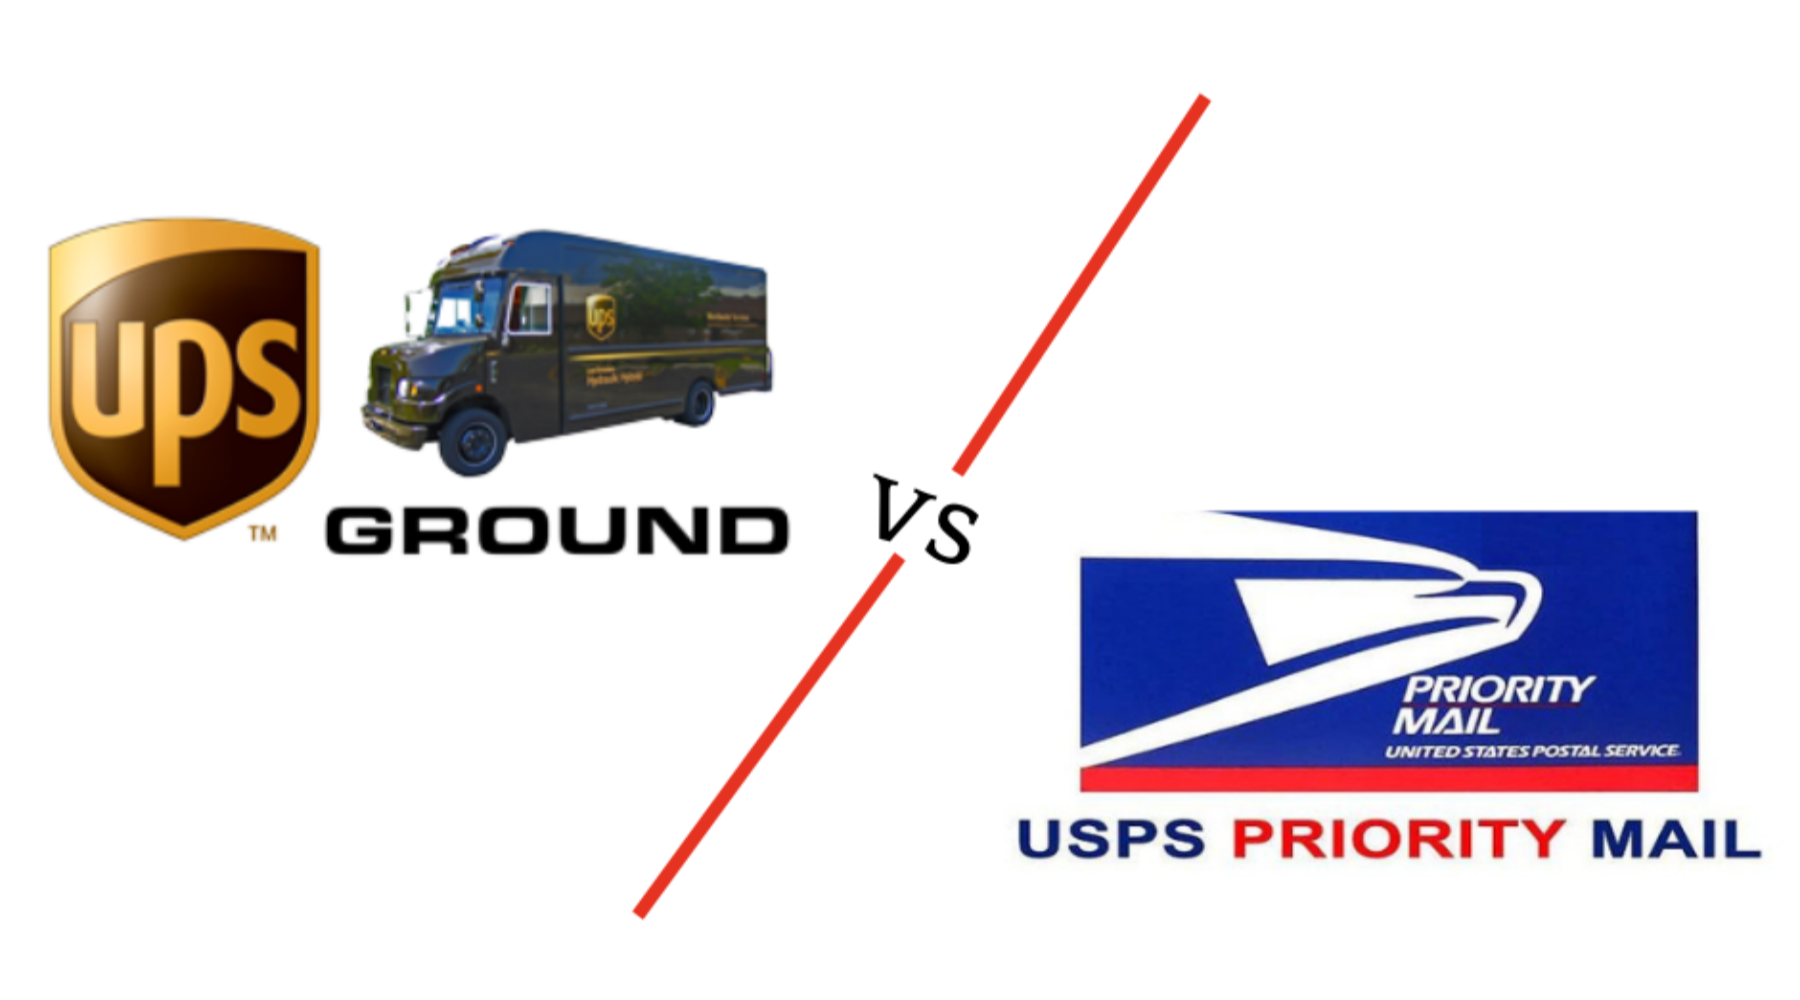 Which Shipping Service Is Right for You: UPS Ground VS USPS Priority?